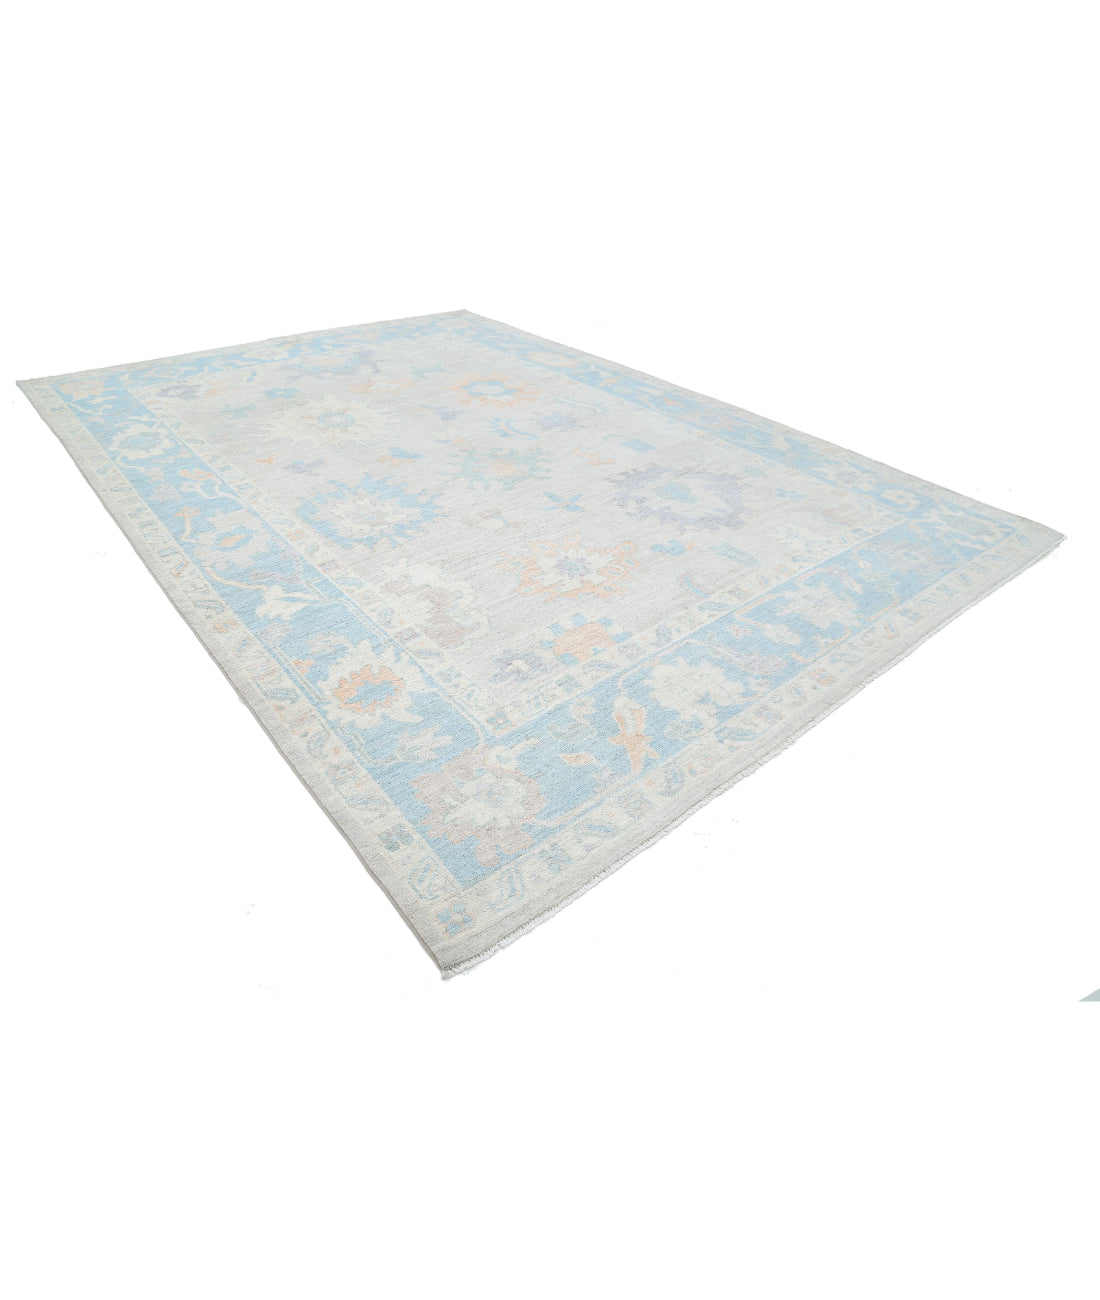 Hand Knotted Oushak Wool Rug - 10'3'' x 14'2'' 10'3'' x 14'2'' (308 X 425) / Grey / Blue